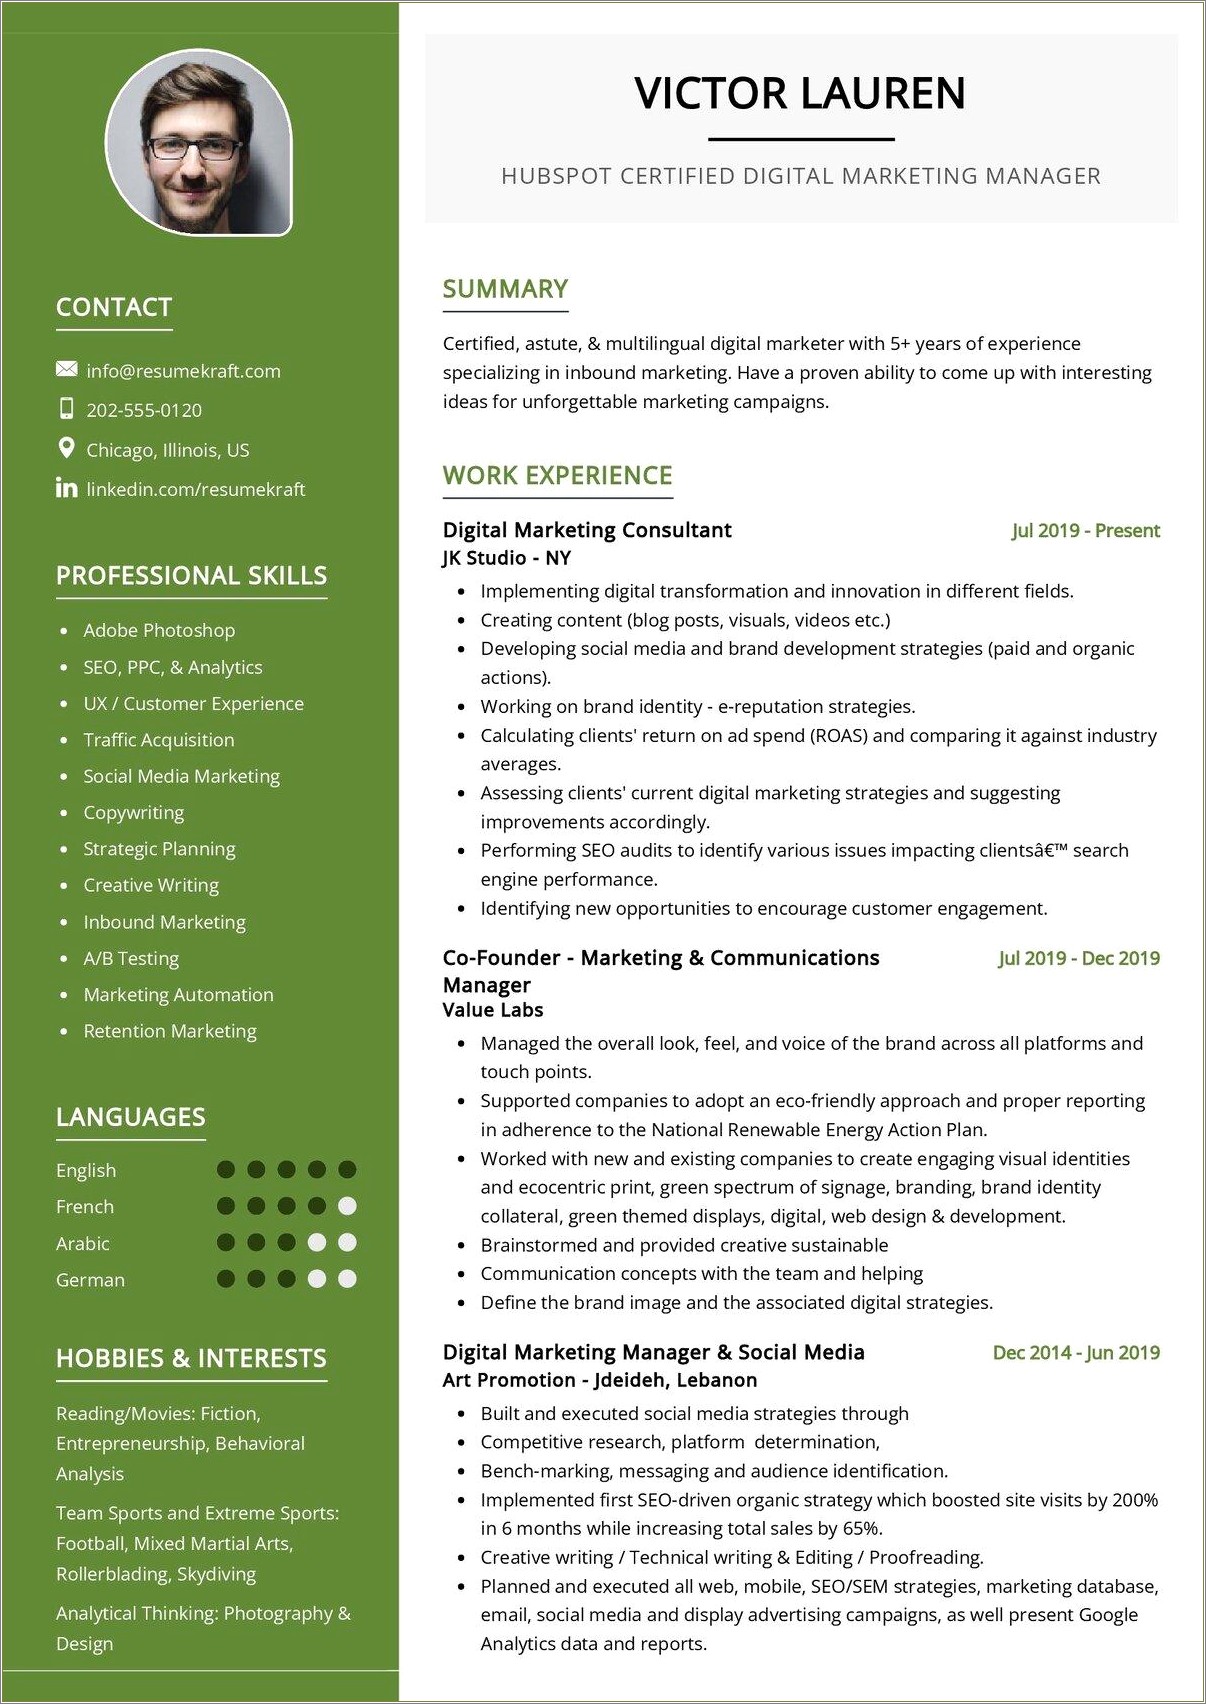 Resume Examples Of Digital Marketing Manager